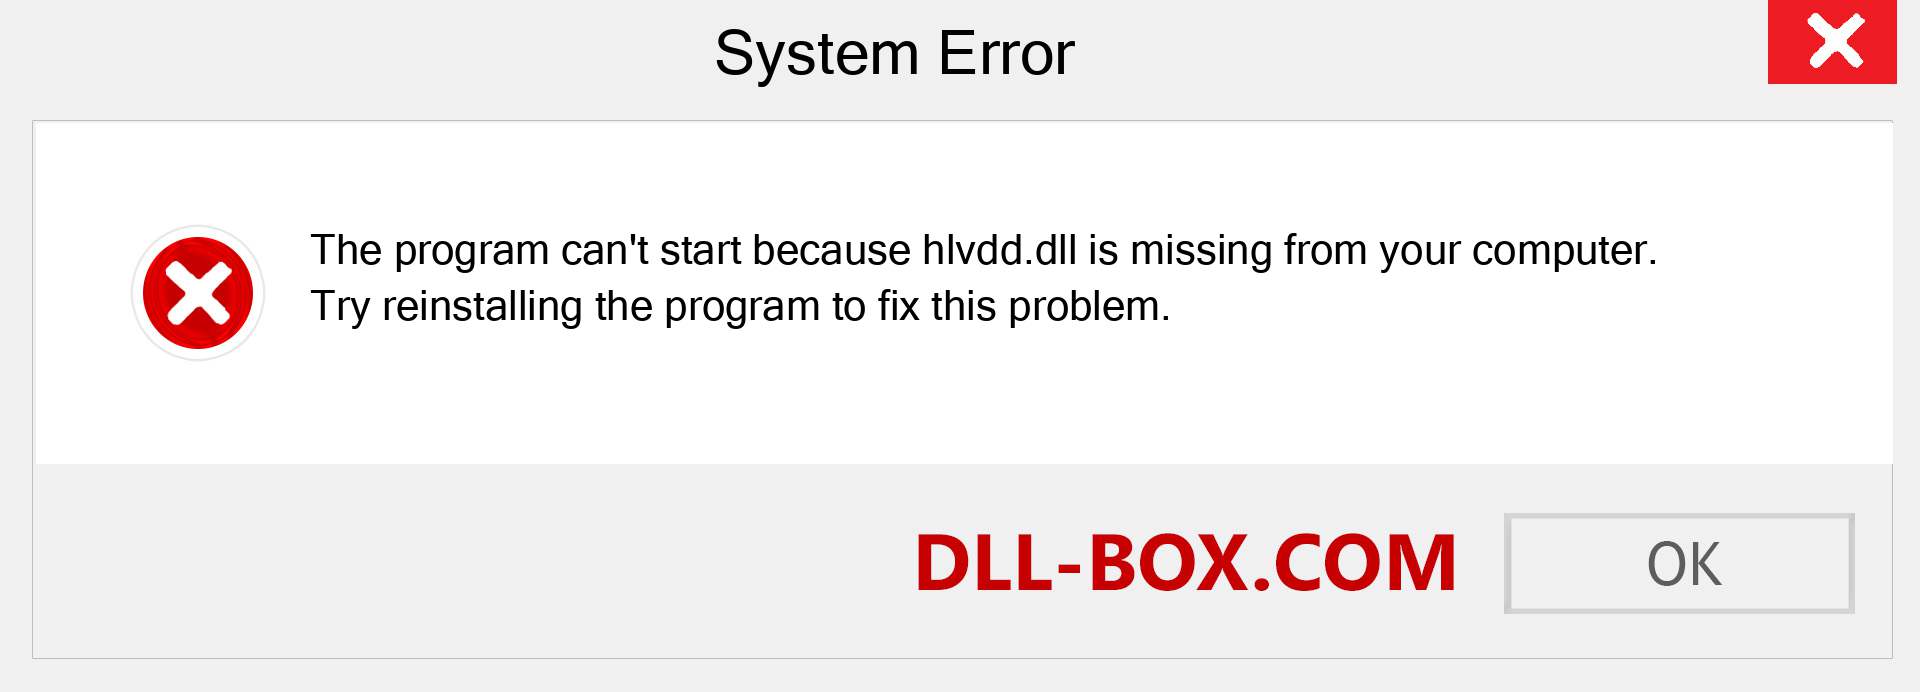  hlvdd.dll file is missing?. Download for Windows 7, 8, 10 - Fix  hlvdd dll Missing Error on Windows, photos, images